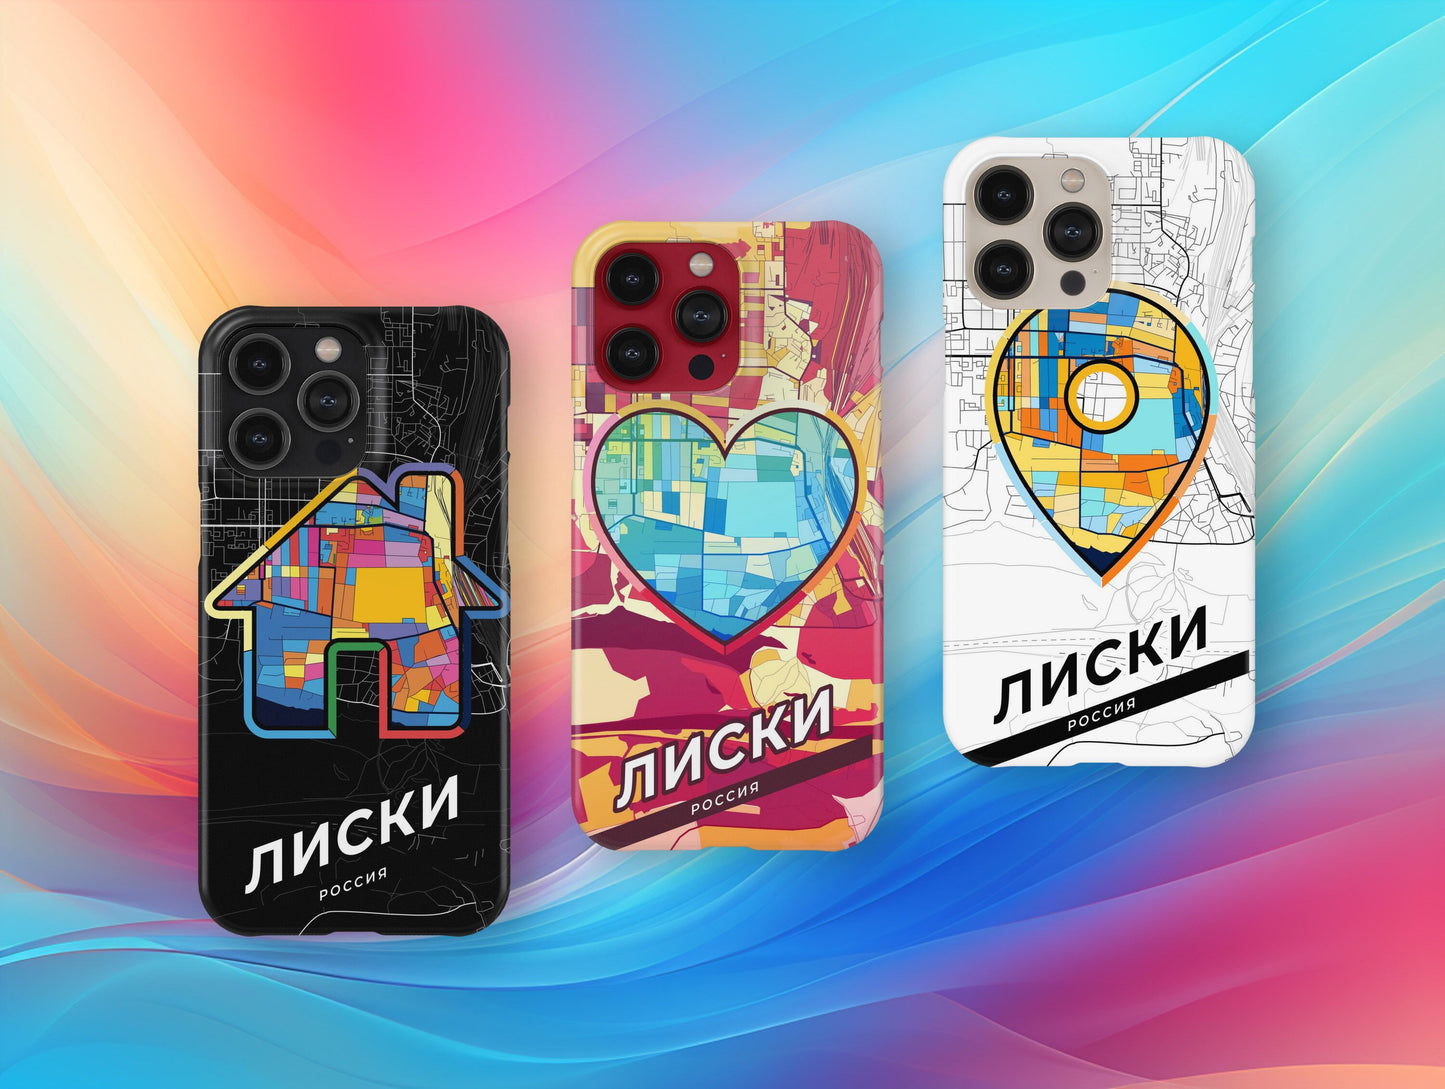 Liski Russia slim phone case with colorful icon. Birthday, wedding or housewarming gift. Couple match cases.